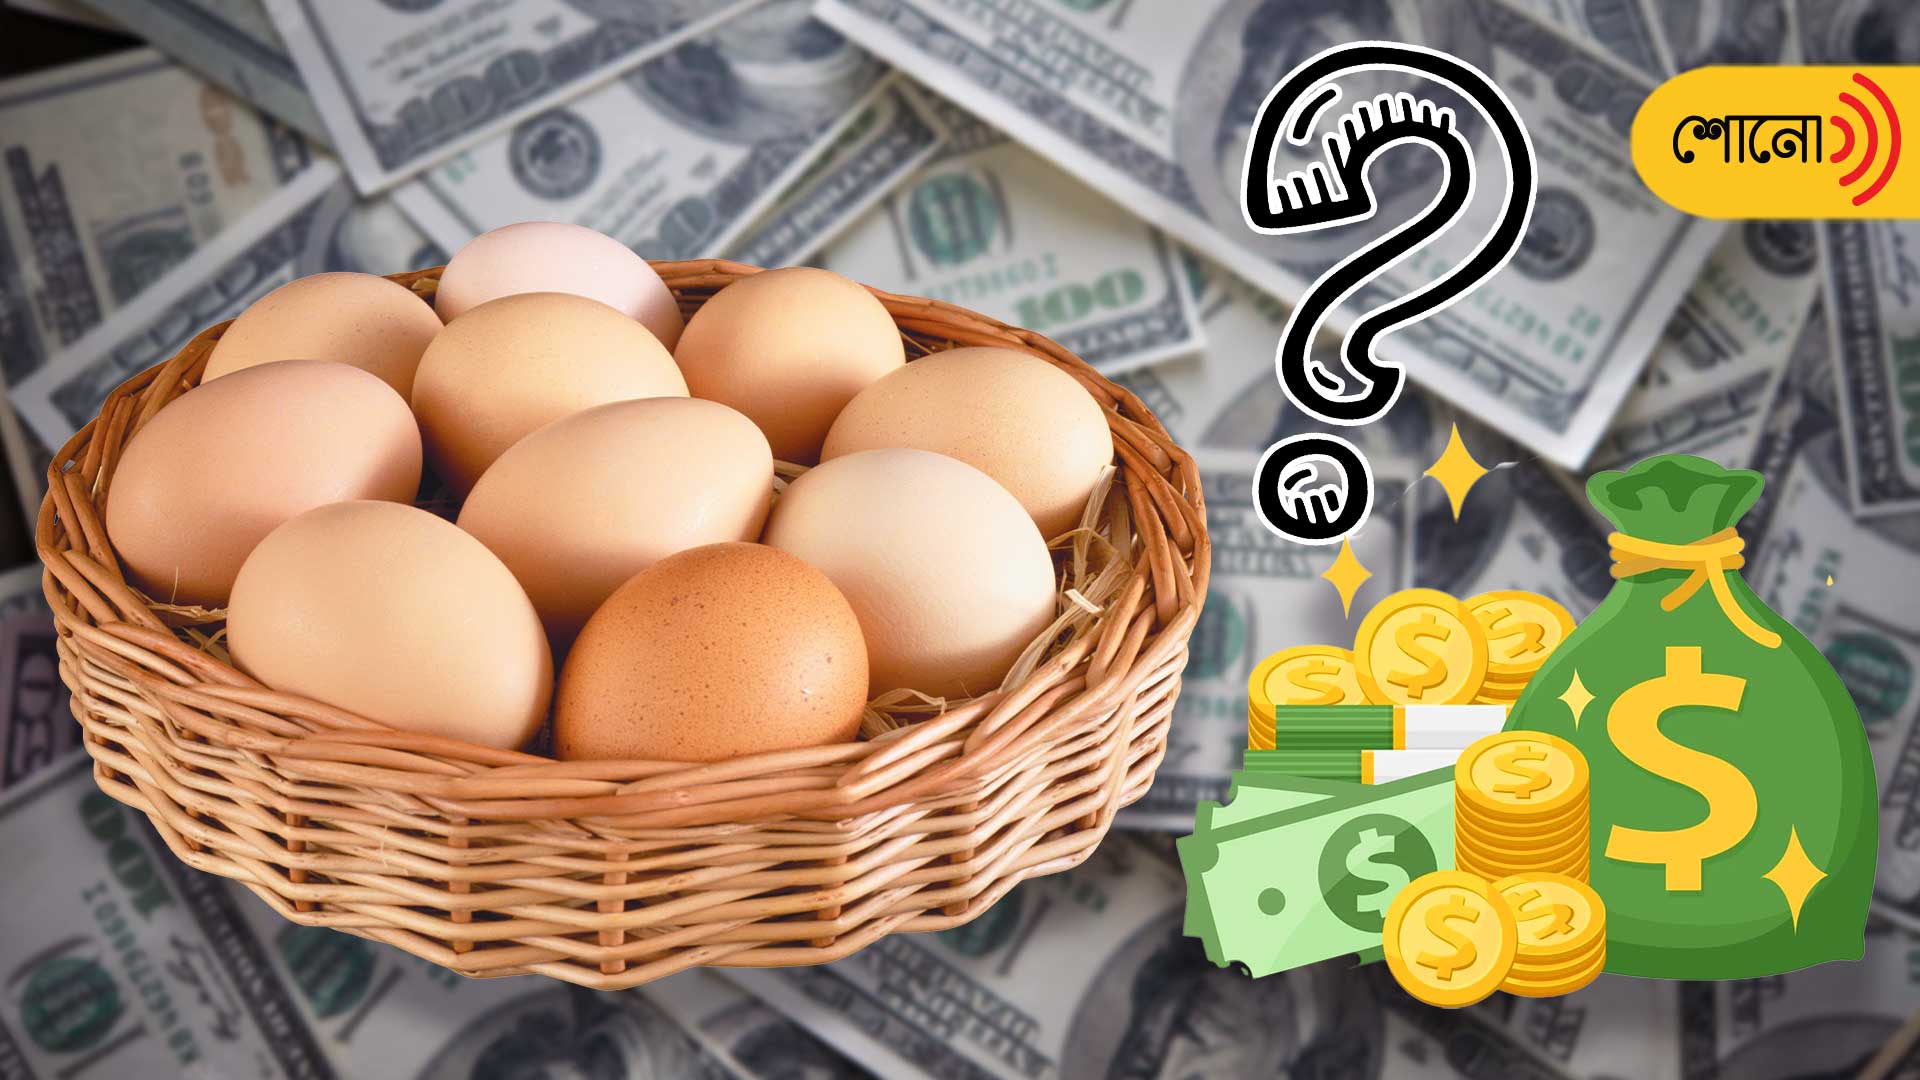 What is the most expensive egg in the world?